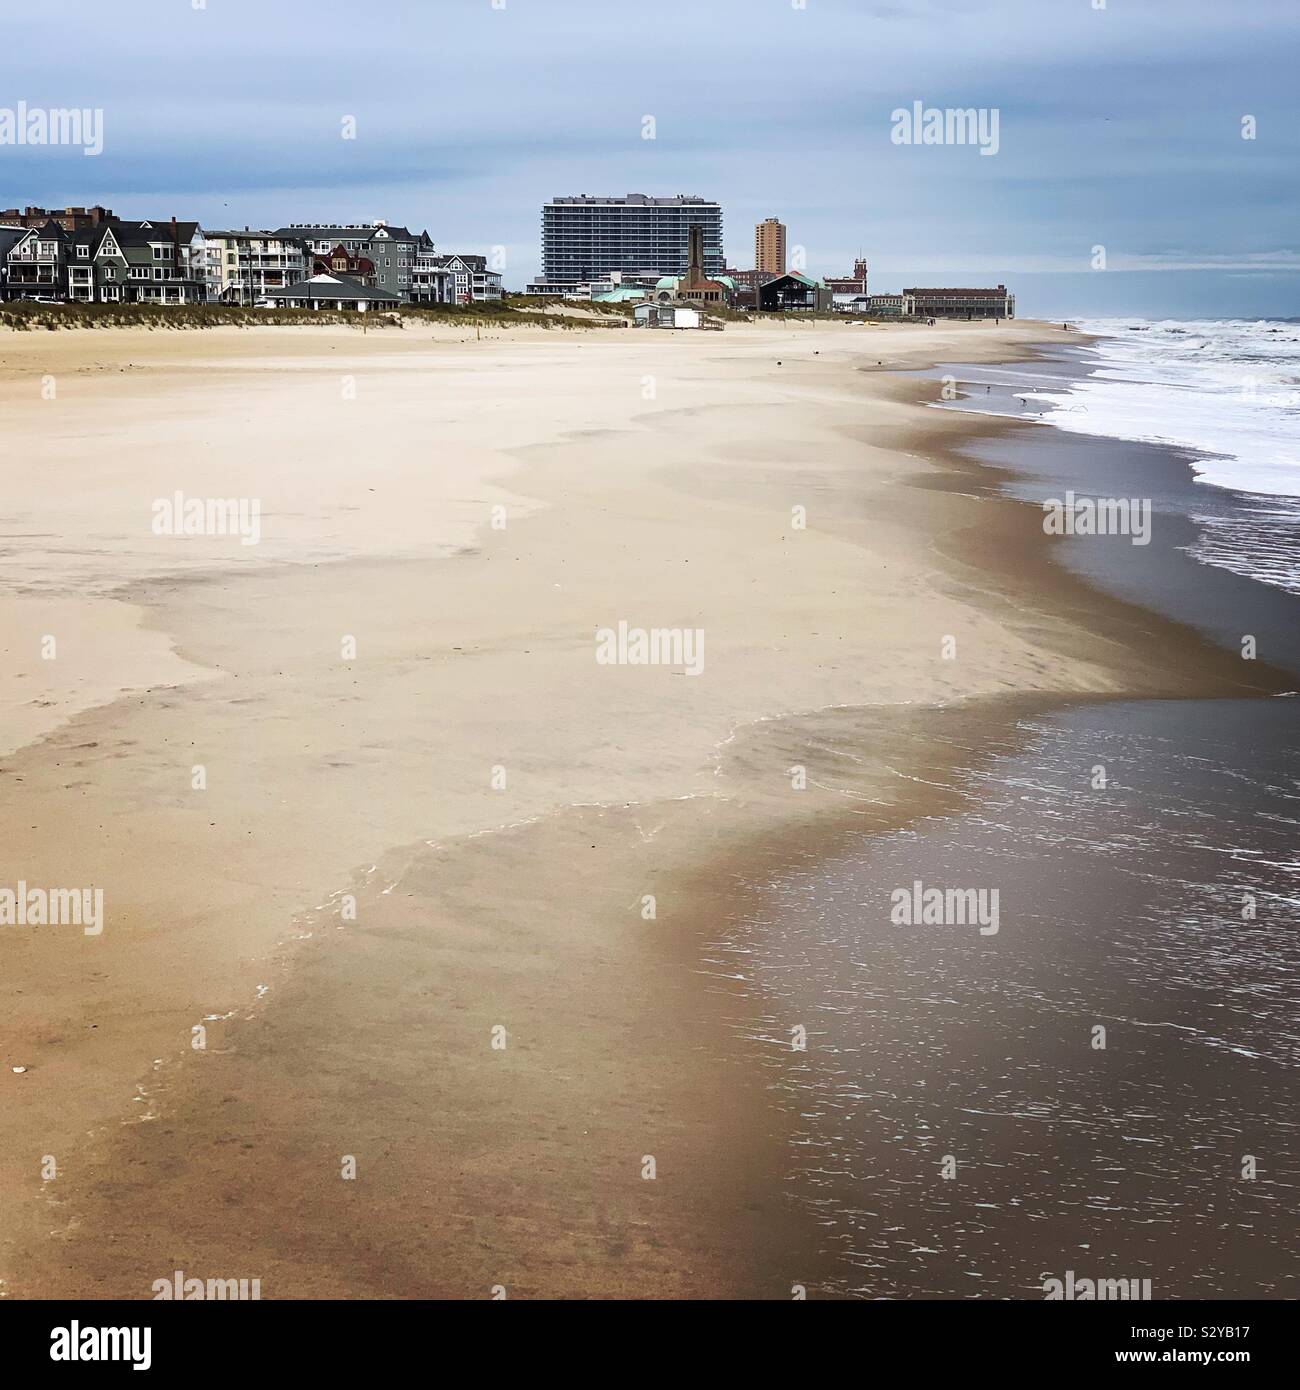 On the beach in October in Ocean Grove, Neptune Township, Monmouth County, New Jersey, United States Stock Photo